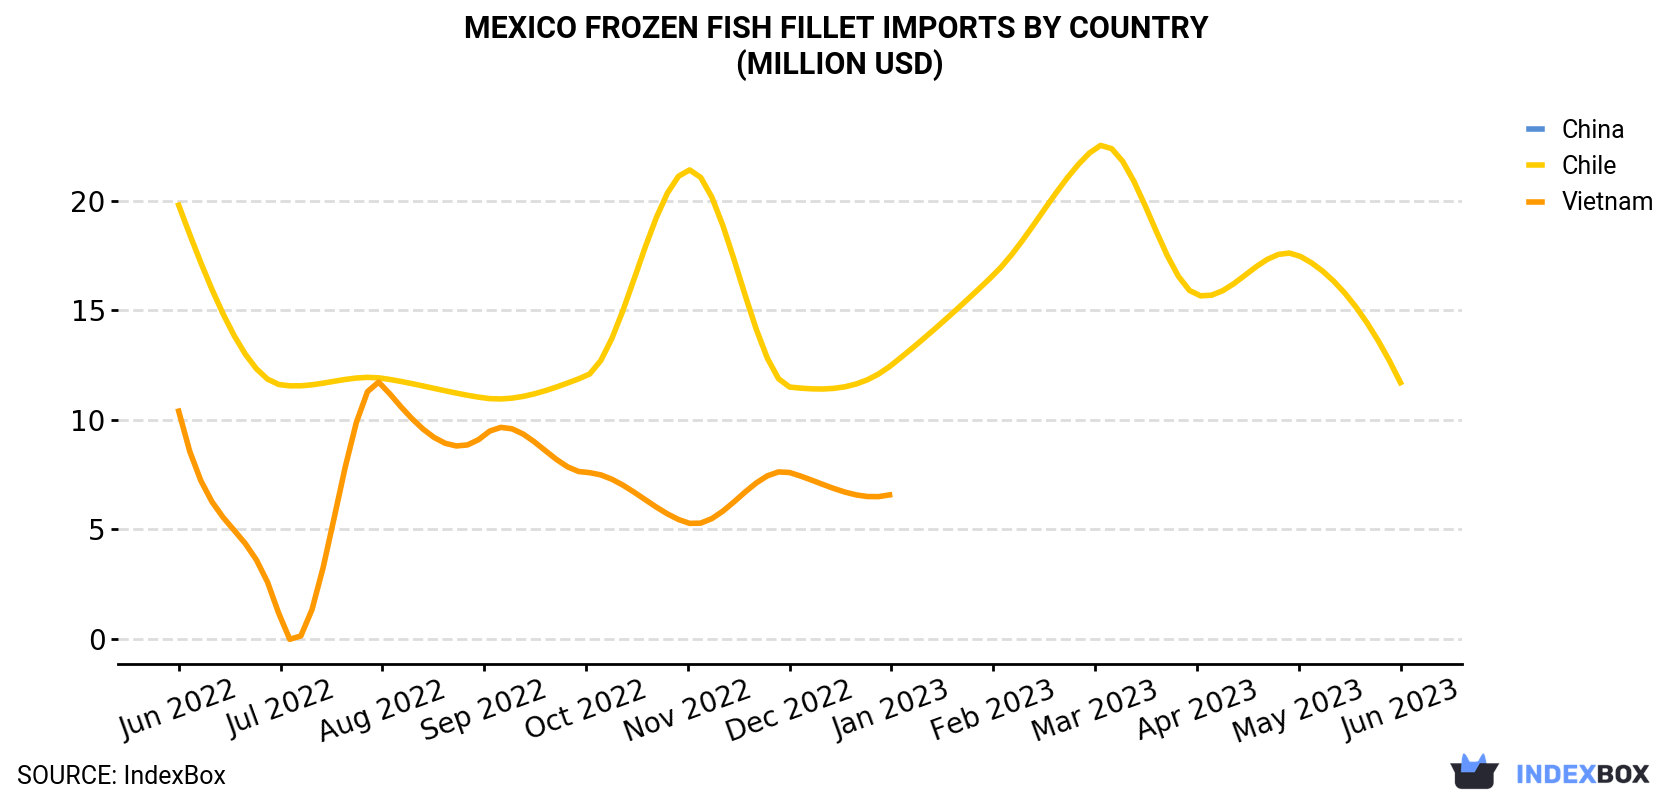 Mexico Frozen Fish Fillet Imports By Country (Million USD)